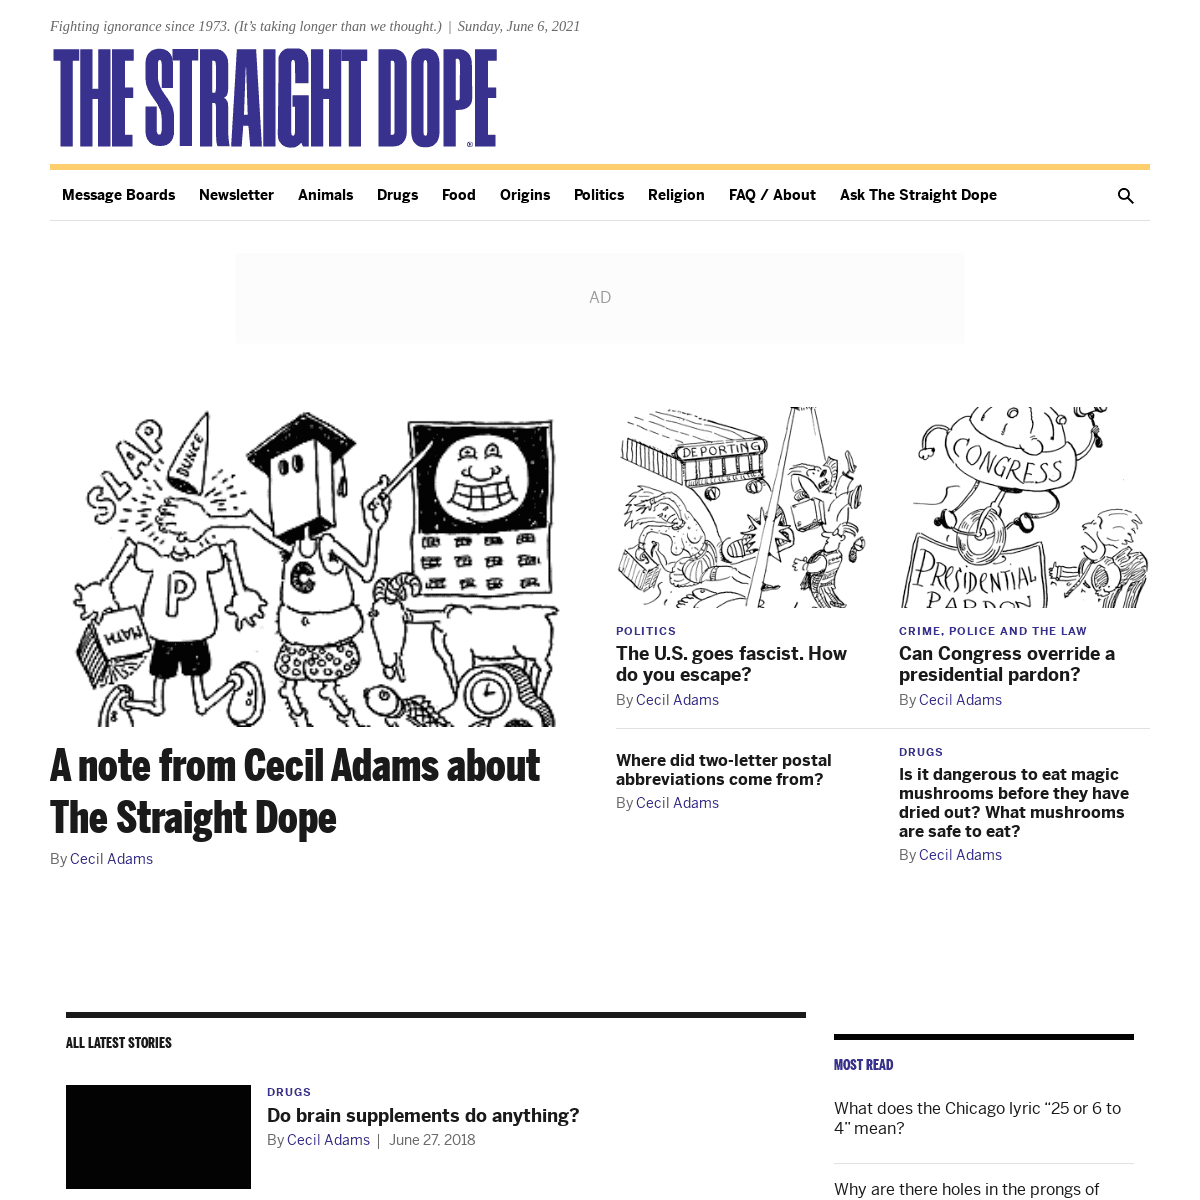 A complete backup of https://straightdope.com